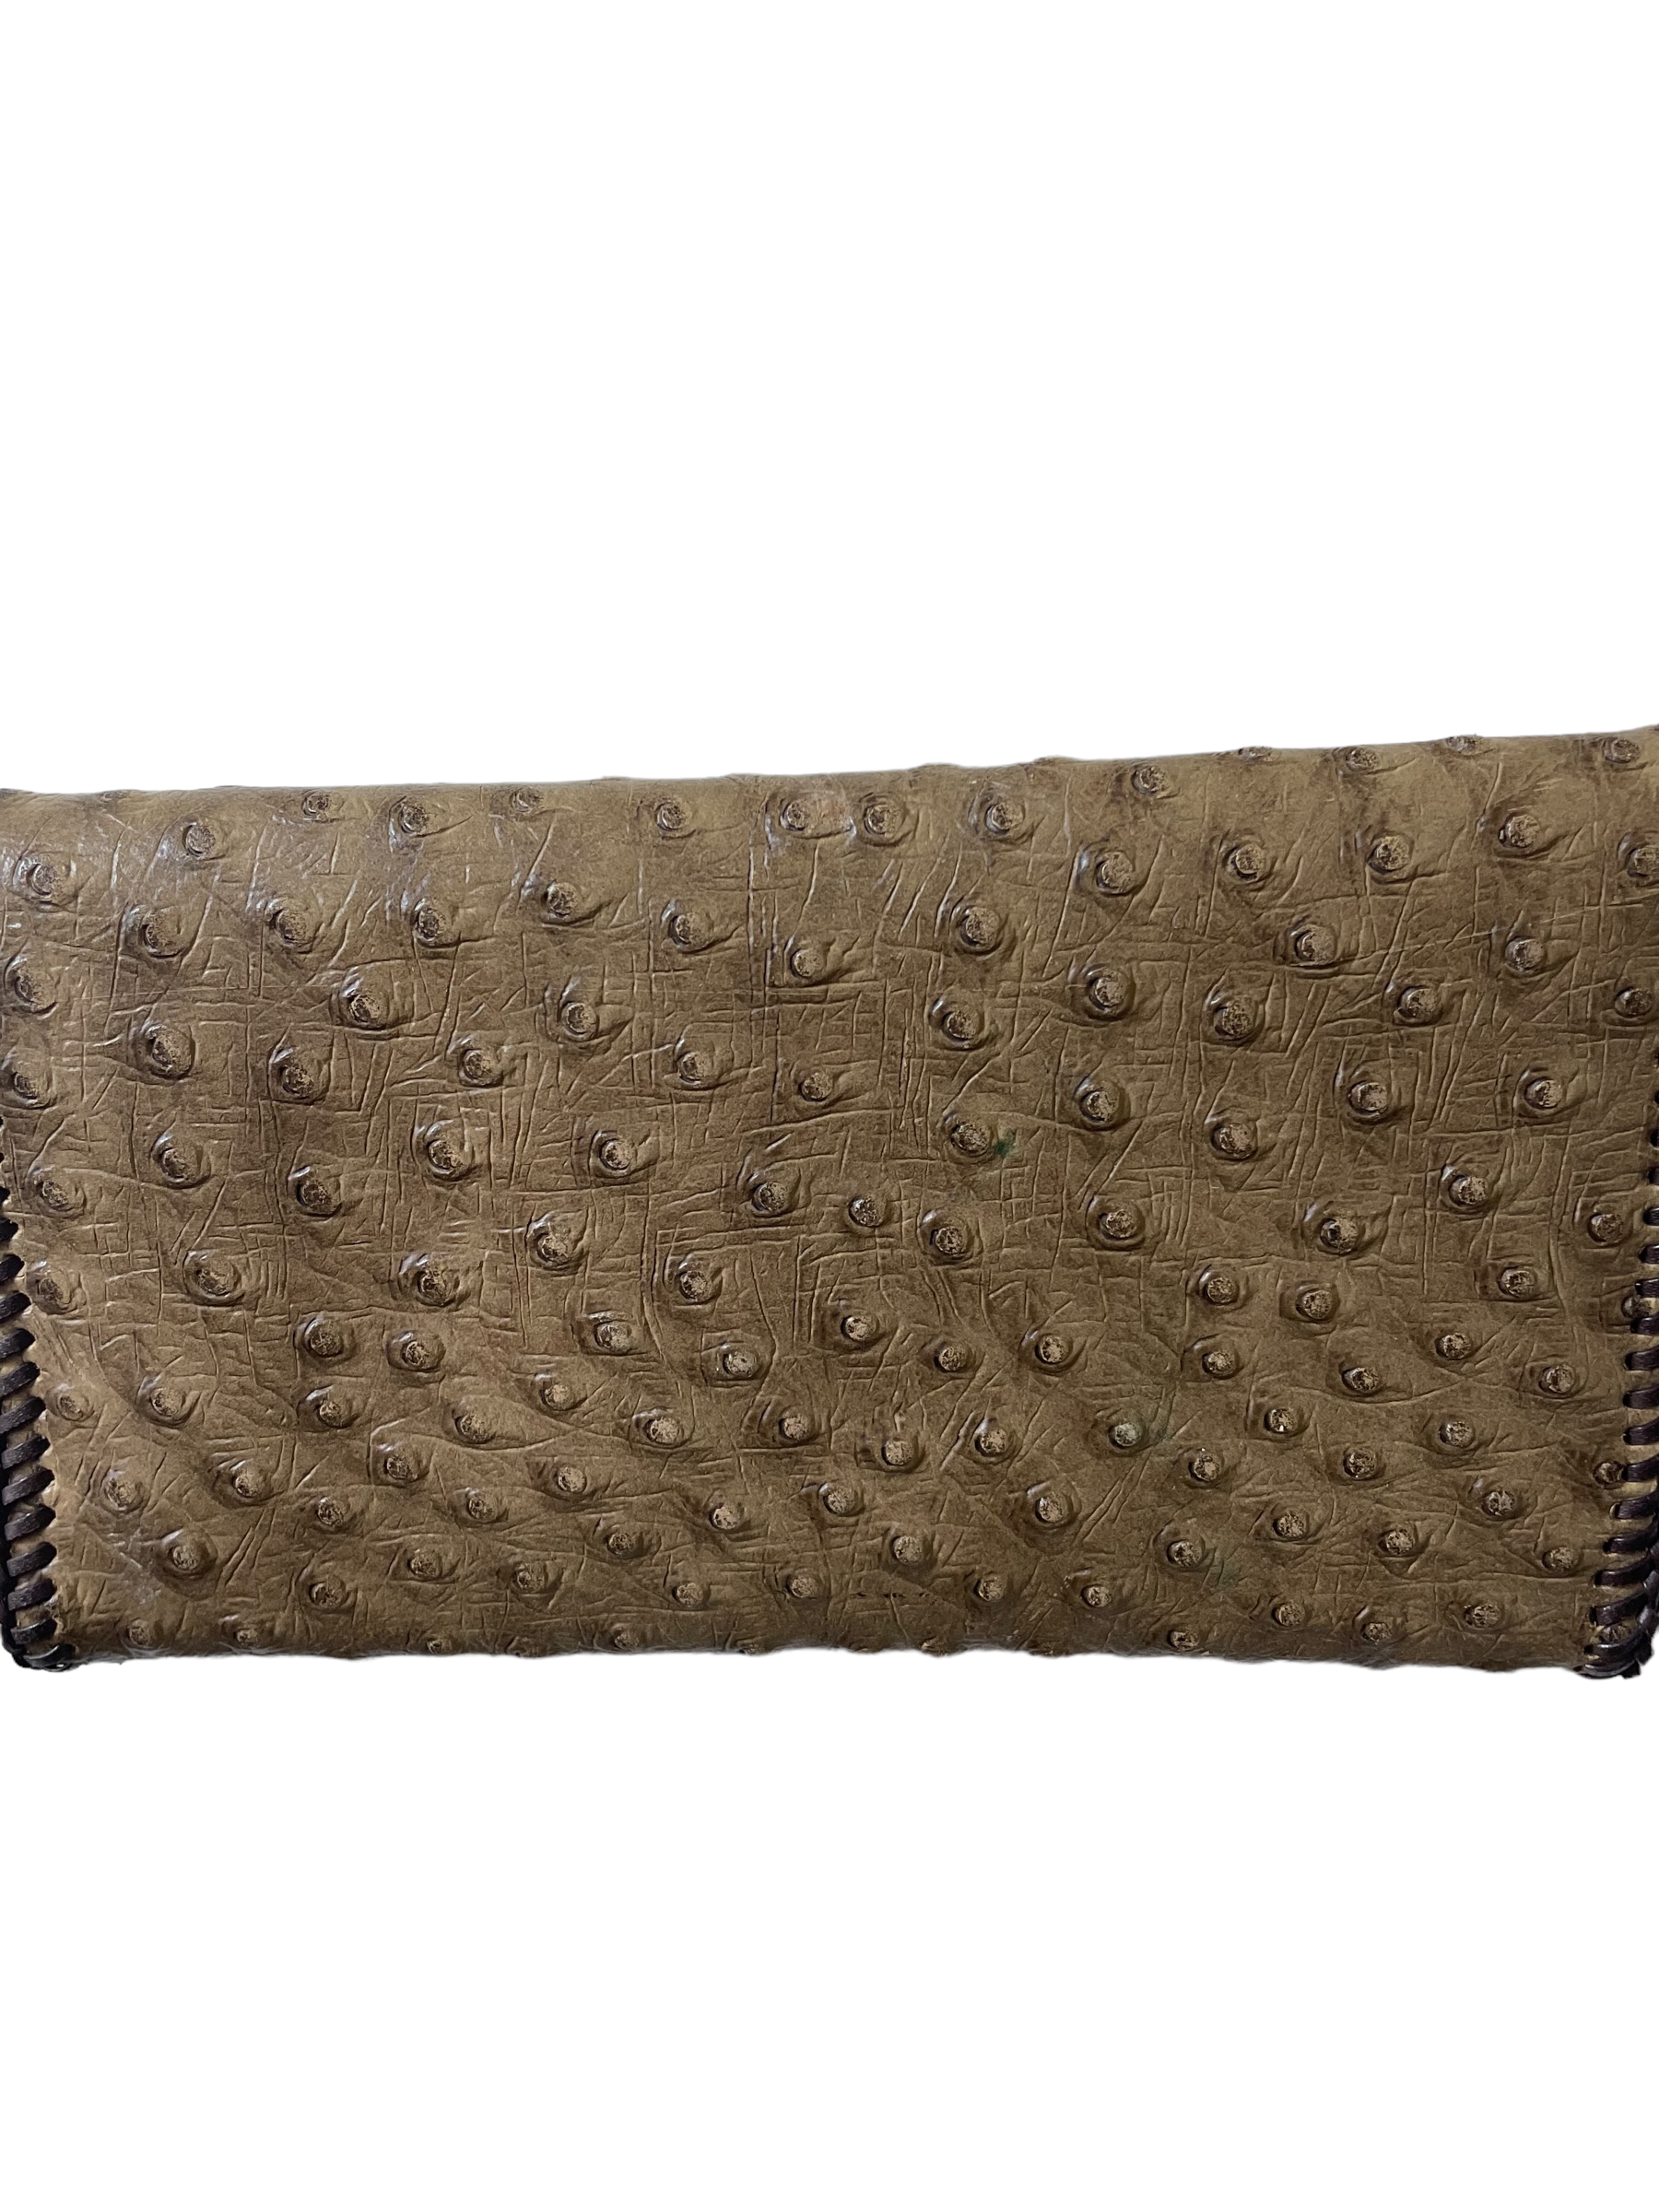 Vintage Ostrich Leather Wallet full back view